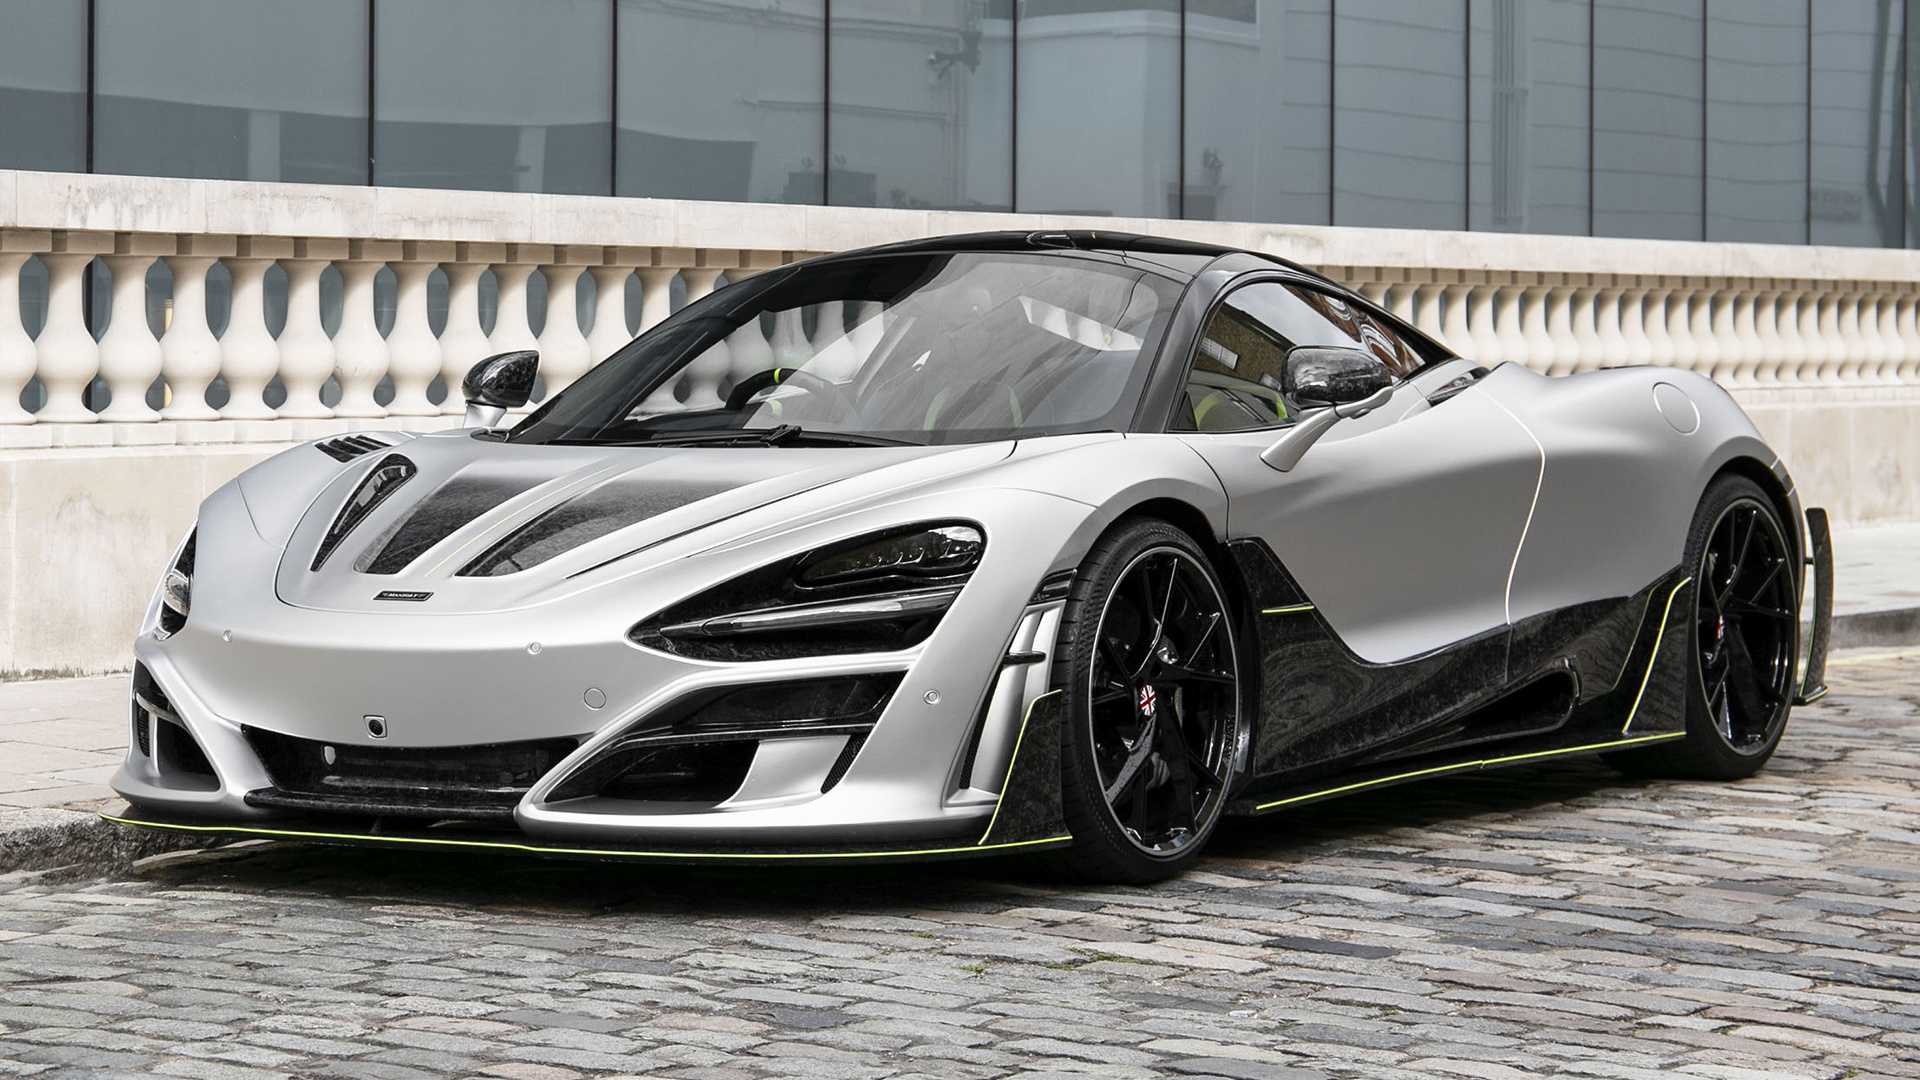 Car Mclaren 720s First Edition By Mansory Silver Car Sport Car Supercar Tuning 1920x1080